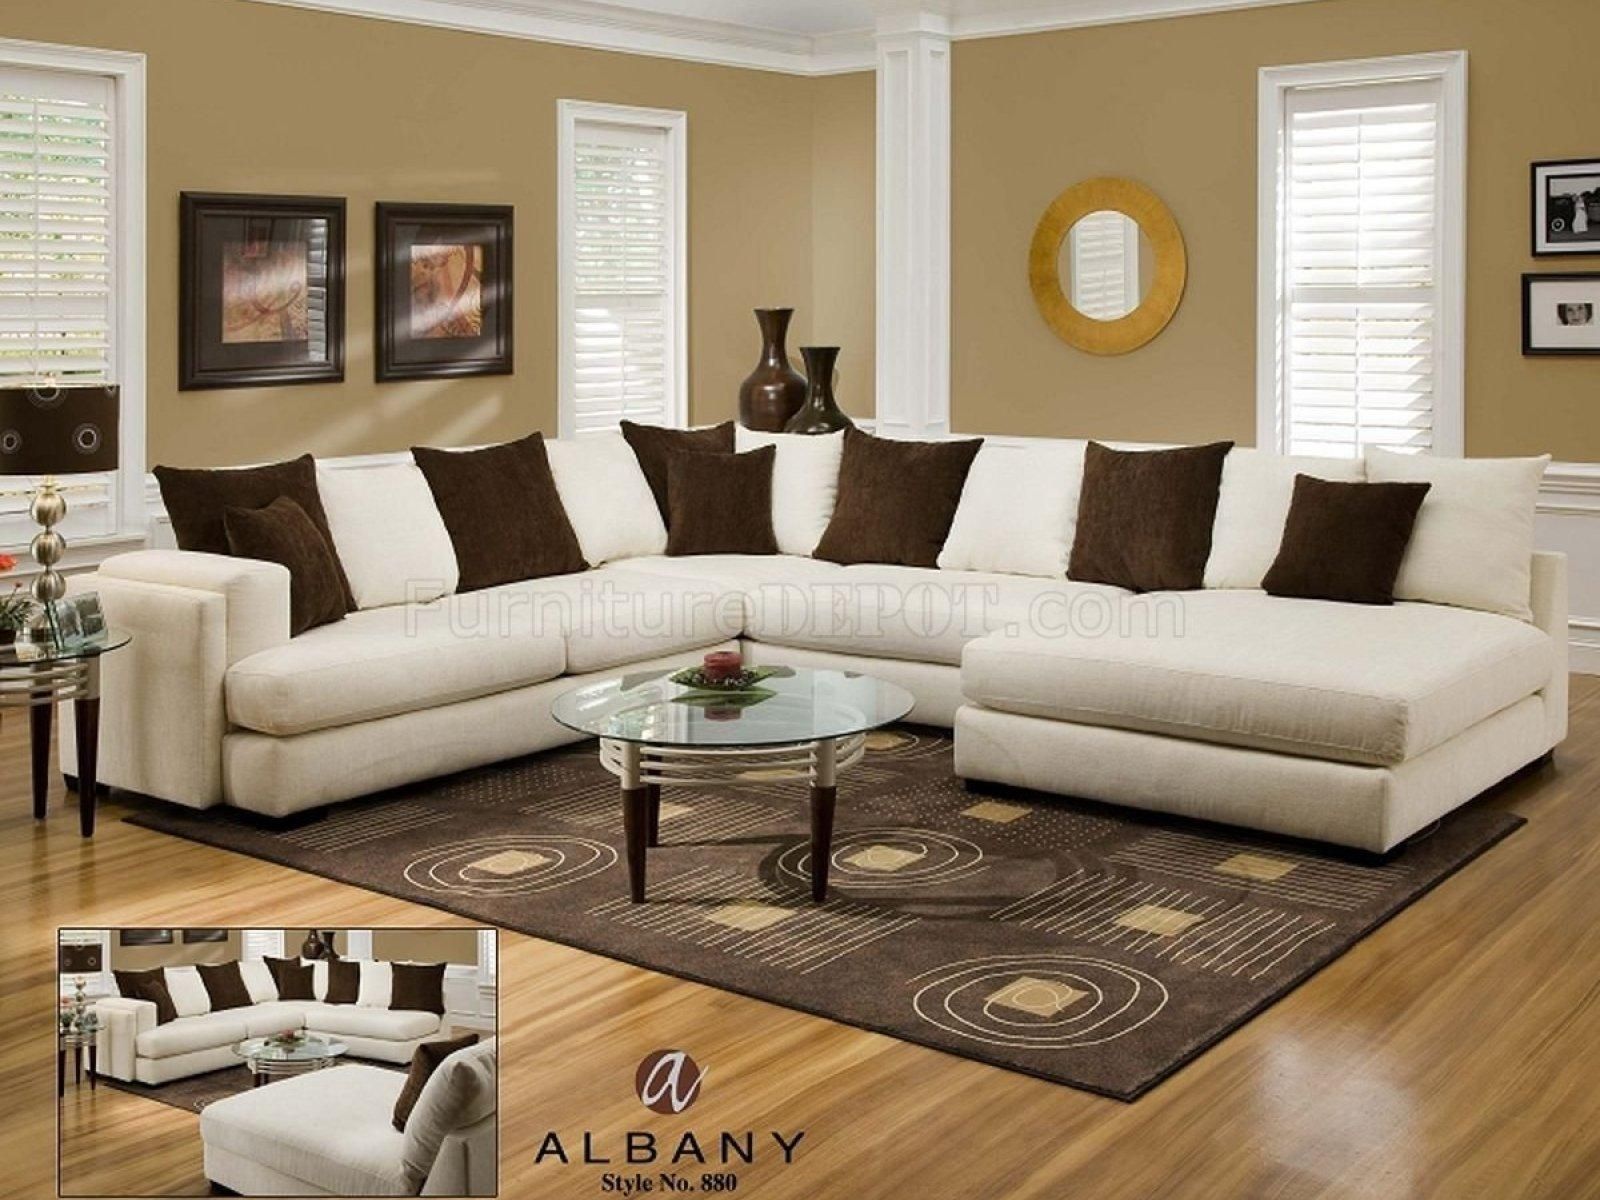 ▻ Sofa : 39 Slipcovers For Sectionals Bed Bath And Beyond Pertaining To Sofas Cover For Sectional Sofas (View 17 of 20)